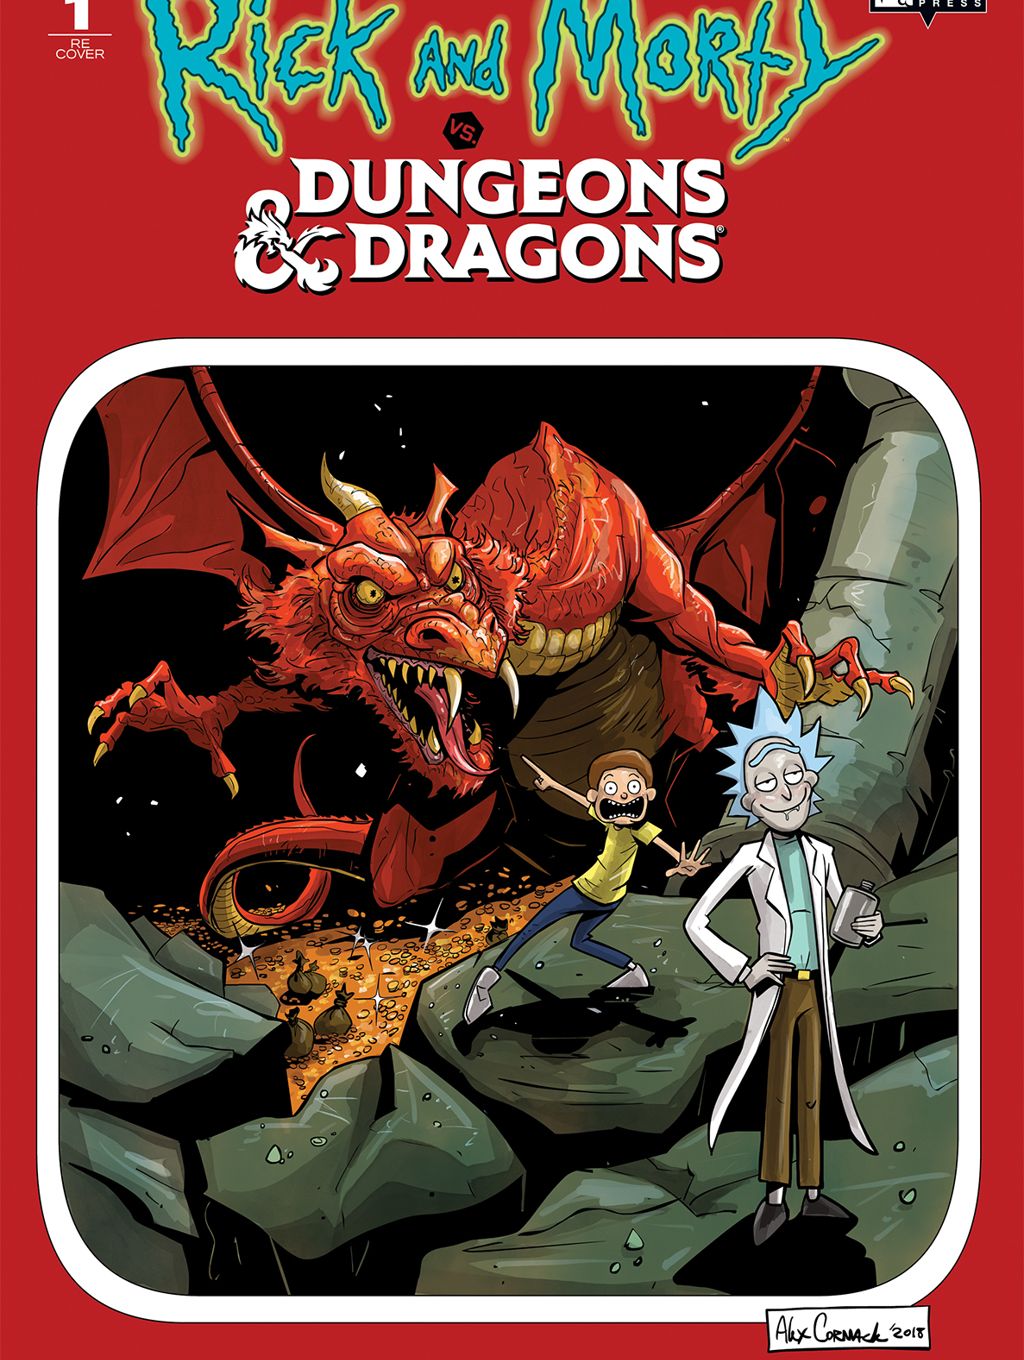 Third Rick & Morty Vs Dungeons & Dragons In IDW February 2022 Solicits